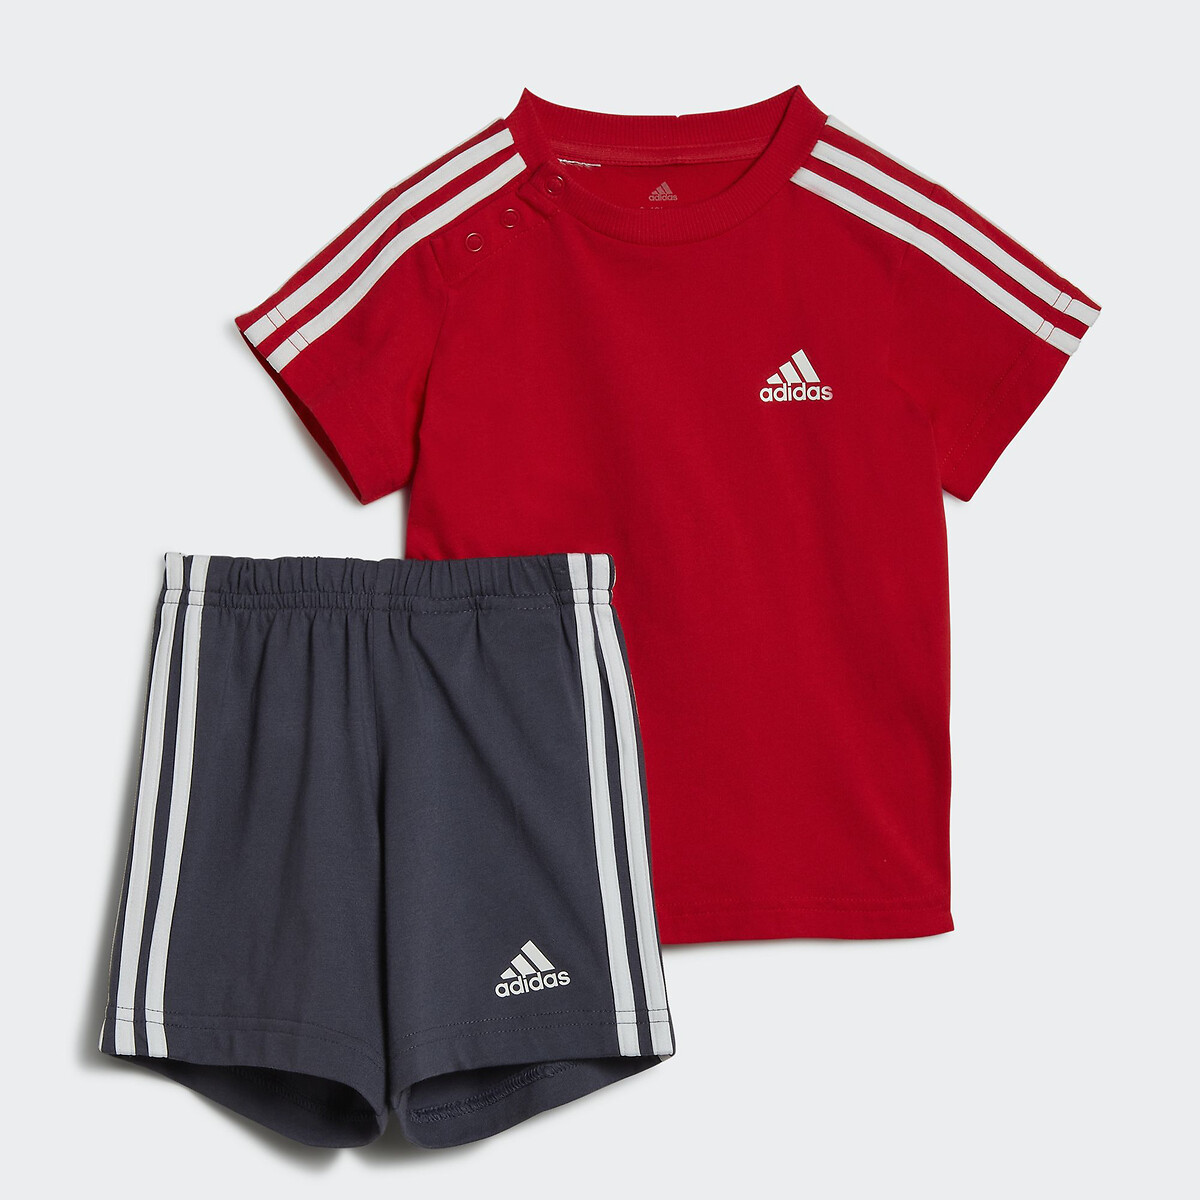 Cotton T Shirt Shorts Outfit Red Navy Adidas Performance La Redoute